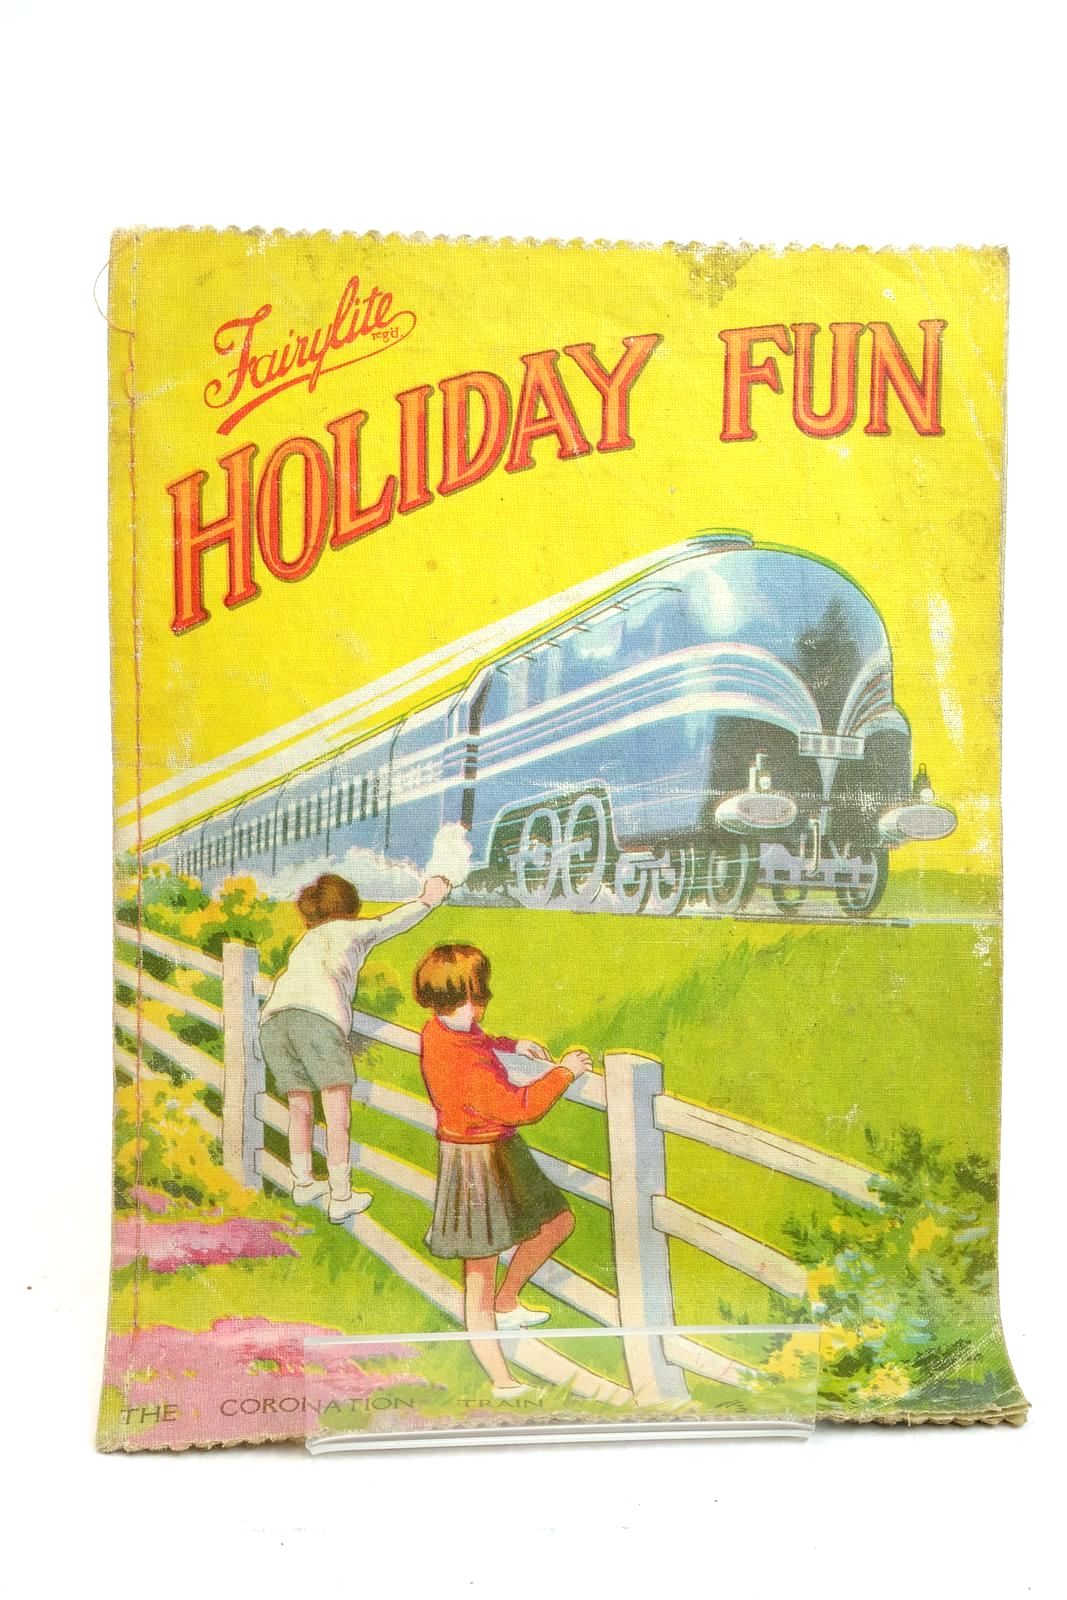 Photo of HOLIDAY FUN published by Fairylite (STOCK CODE: 1321151)  for sale by Stella & Rose's Books